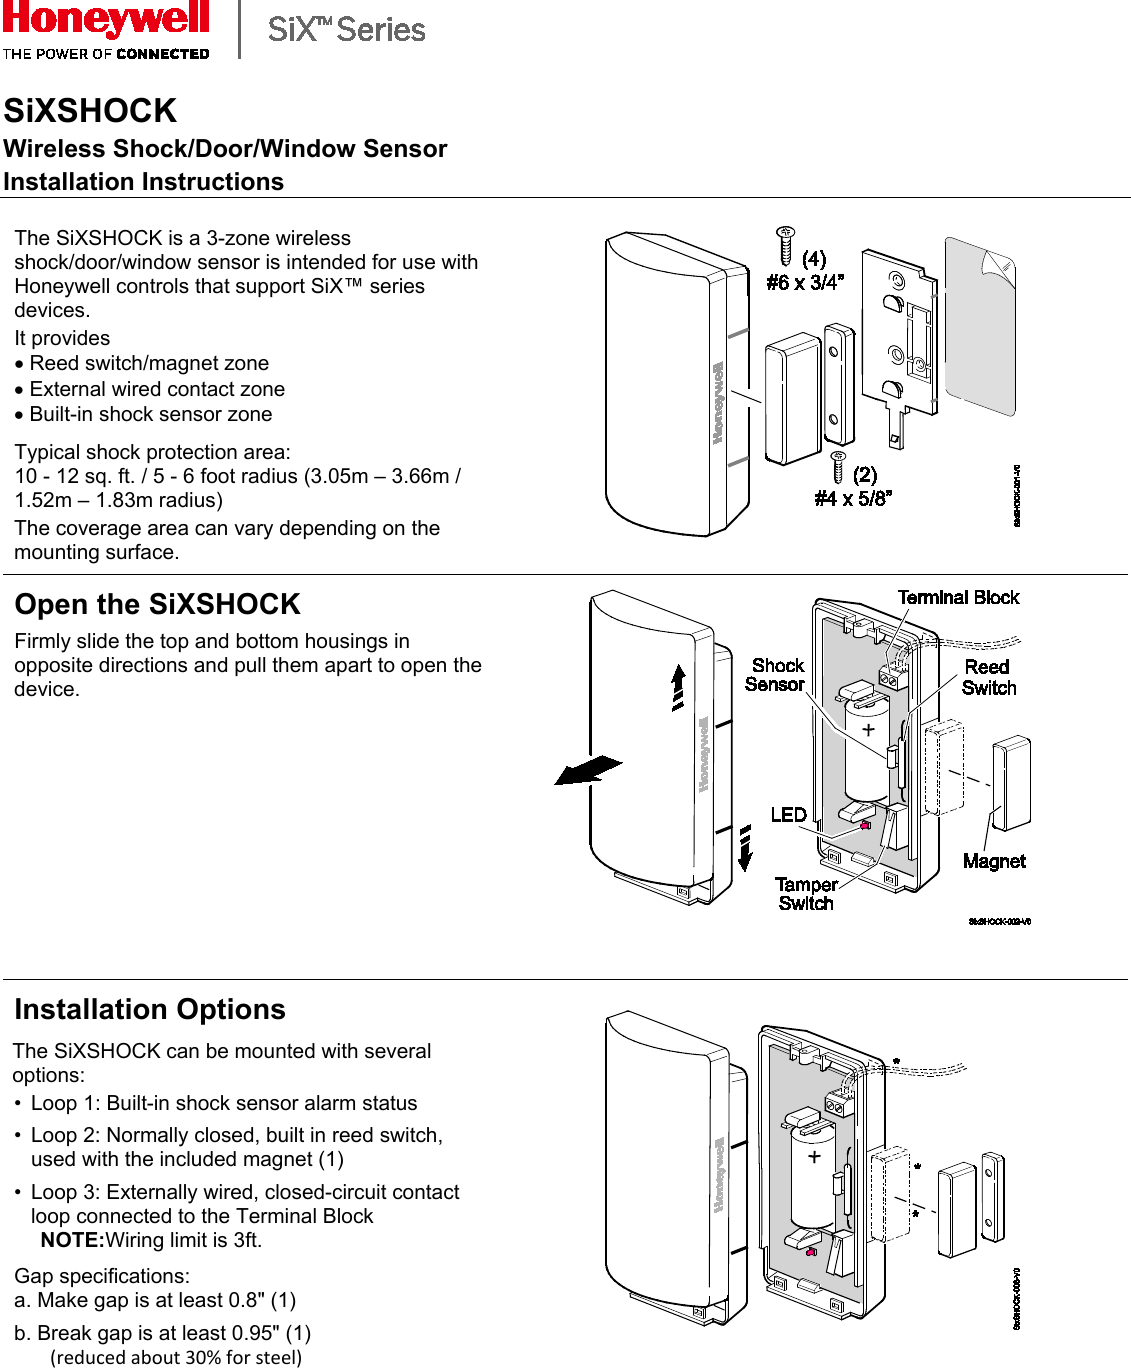    SiXSHOCK Wireless Shock/Door/Window Sensor Installation Instructions  The SiXSHOCK is a 3-zone wireless shock/door/window sensor is intended for use with Honeywell controls that support SiX™ series devices. It provides  • Reed switch/magnet zone • External wired contact zone • Built-in shock sensor zone  Typical shock protection area:  10 - 12 sq. ft. / 5 - 6 foot radius (3.05m – 3.66m / 1.52m – 1.83m radius)  The coverage area can vary depending on the mounting surface.   Open the SiXSHOCK  Firmly slide the top and bottom housings in opposite directions and pull them apart to open the device.   Installation Options The SiXSHOCK can be mounted with several options: • Loop 1: Built-in shock sensor alarm status  • Loop 2: Normally closed, built in reed switch, used with the included magnet (1)  • Loop 3: Externally wired, closed-circuit contact loop connected to the Terminal Block   NOTE:Wiring limit is 3ft.  Gap specifications:  a. Make gap is at least 0.8&quot; (1)  b. Break gap is at least 0.95&quot; (1)  (reduced about 30% for steel)    